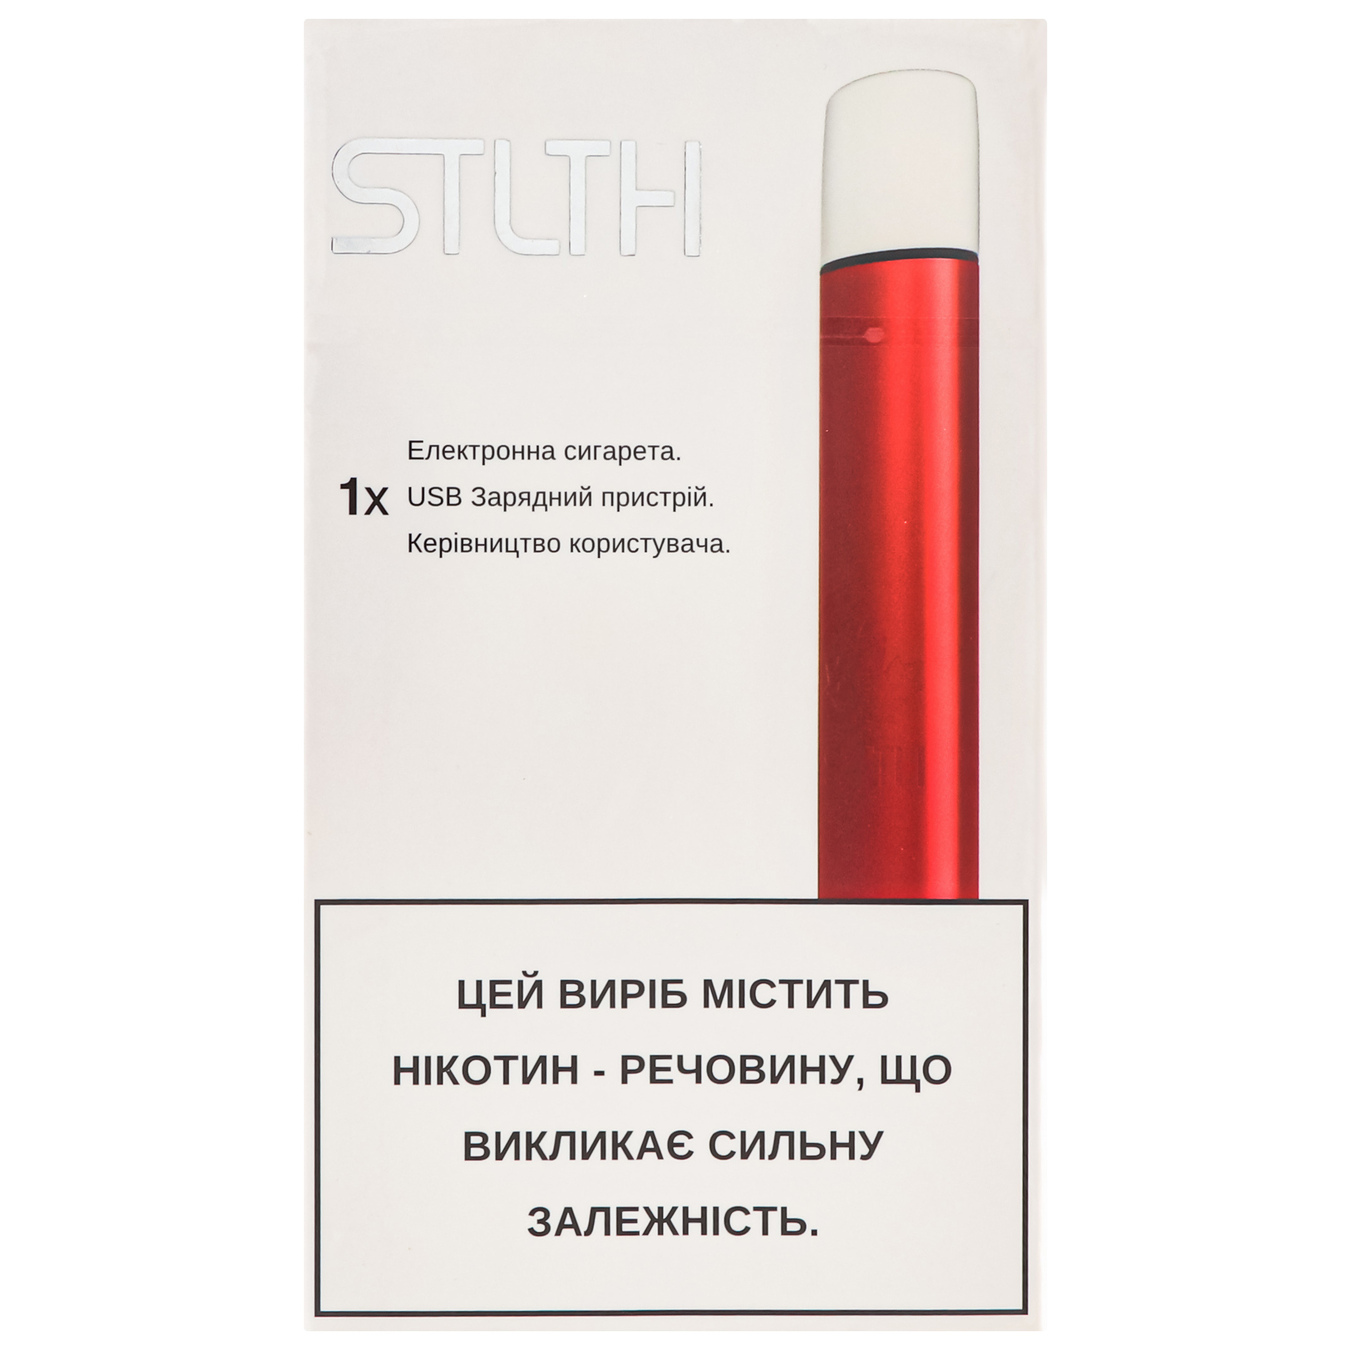 Vaporizer STLTH Red Metal electronic reusable (the price is indicated without excise tax)